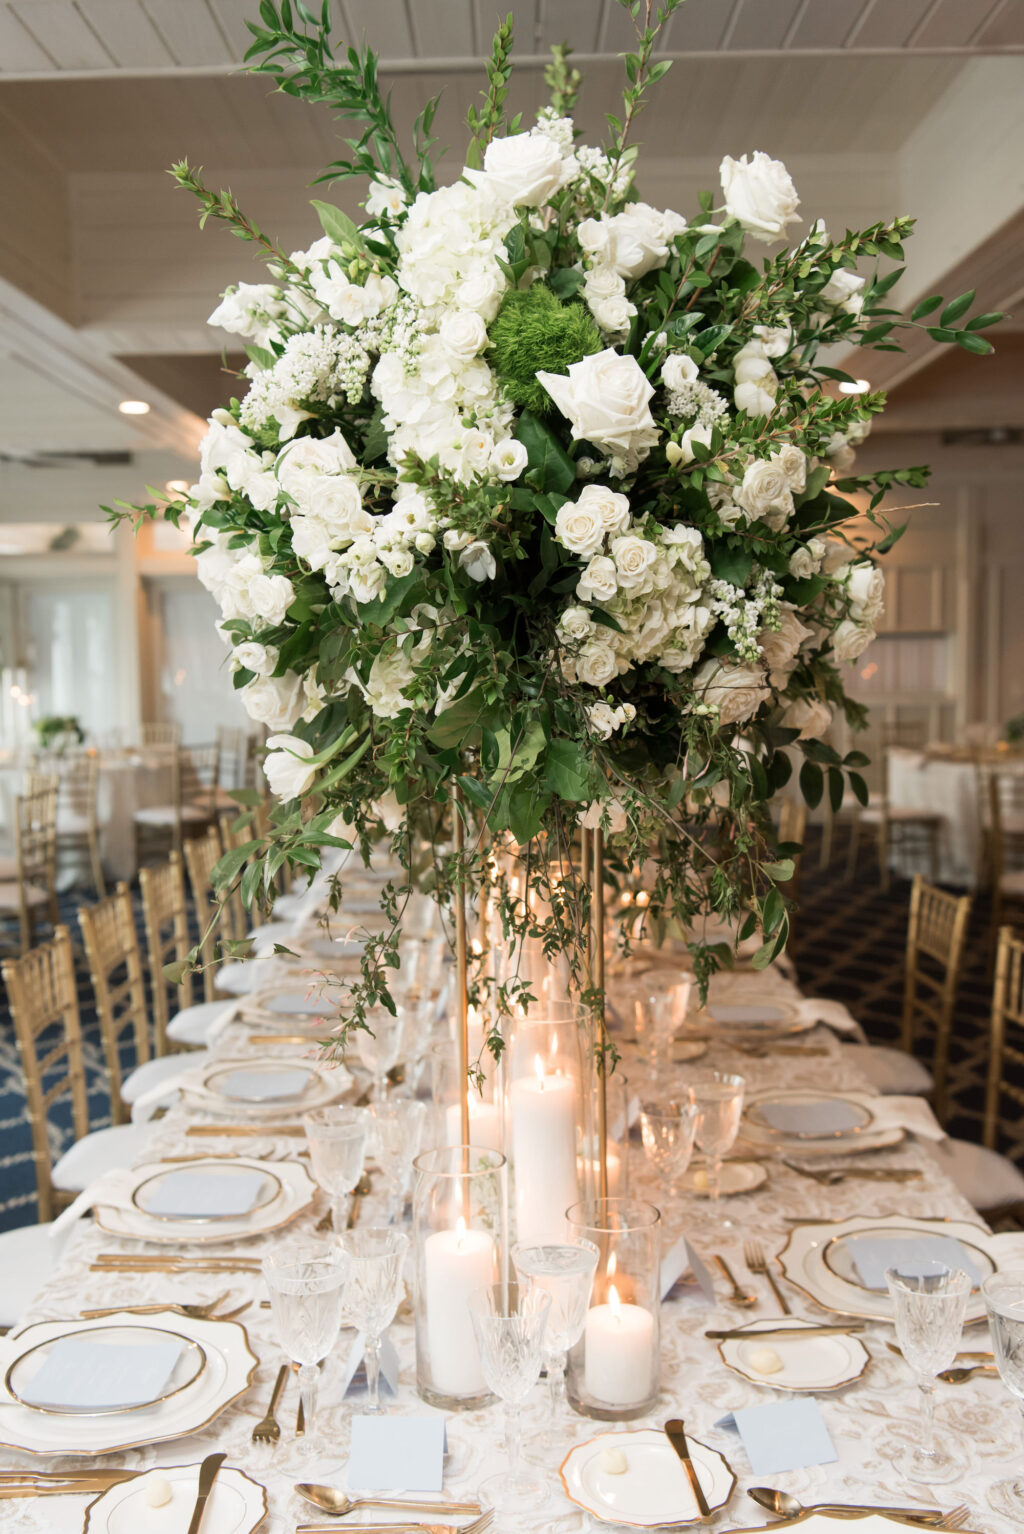 Tall Flower Stand with White Roses, Babies Breath, and Greenery Centerpiece for Wedding Reception Inspiration | Long Feasting Tables with Gold and White Table Settings | Tampa Bay Rentals A Chair Affair | Kate Ryan Event Rentals